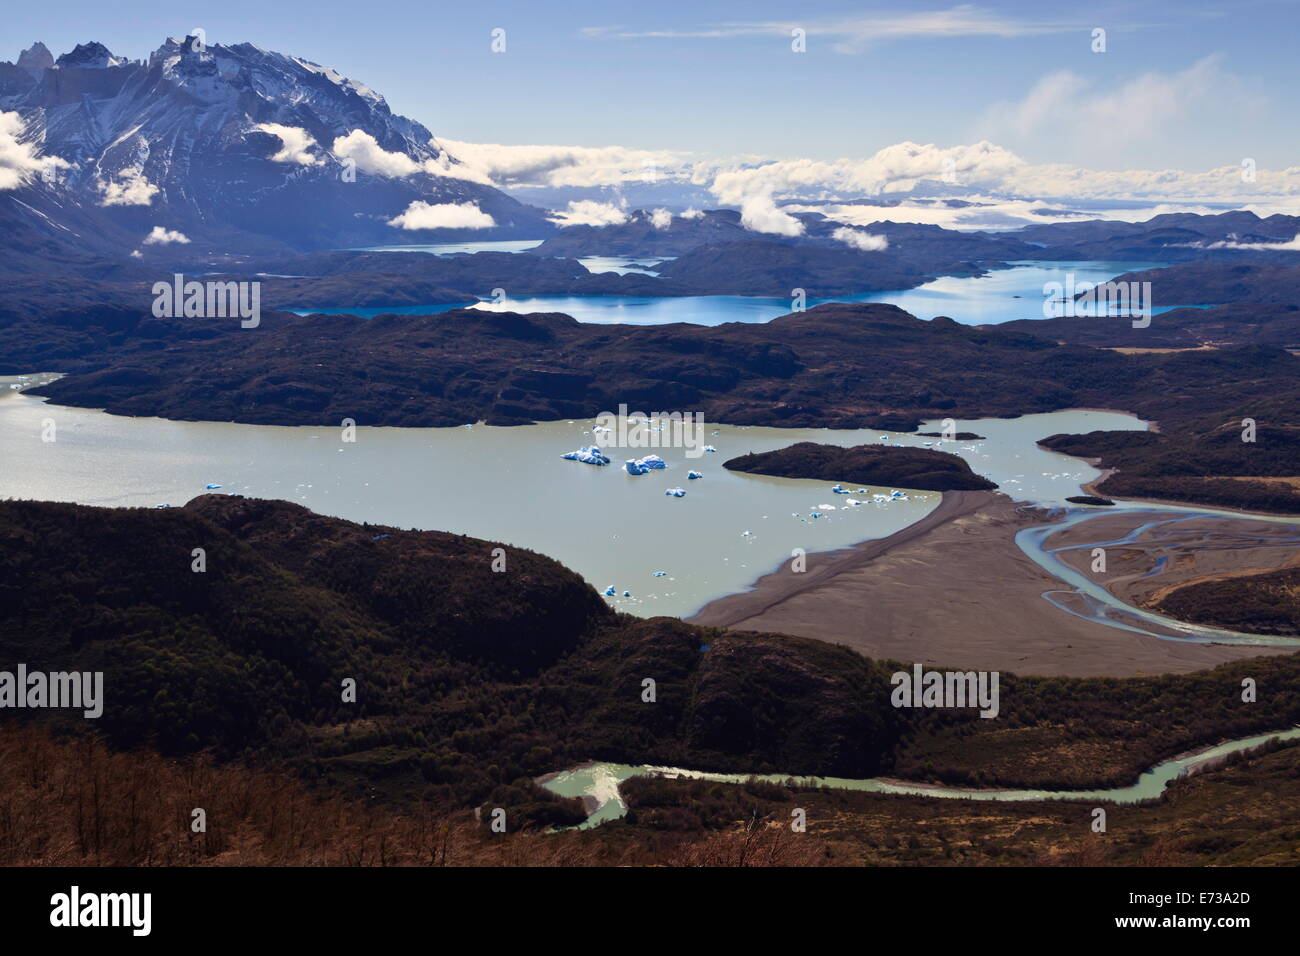 View of lakes Grey, Pehoe, Nordenskjold and Sarmiento, from Ferrier Vista Point, Torres del Paine, Patagonia, Chile Stock Photo